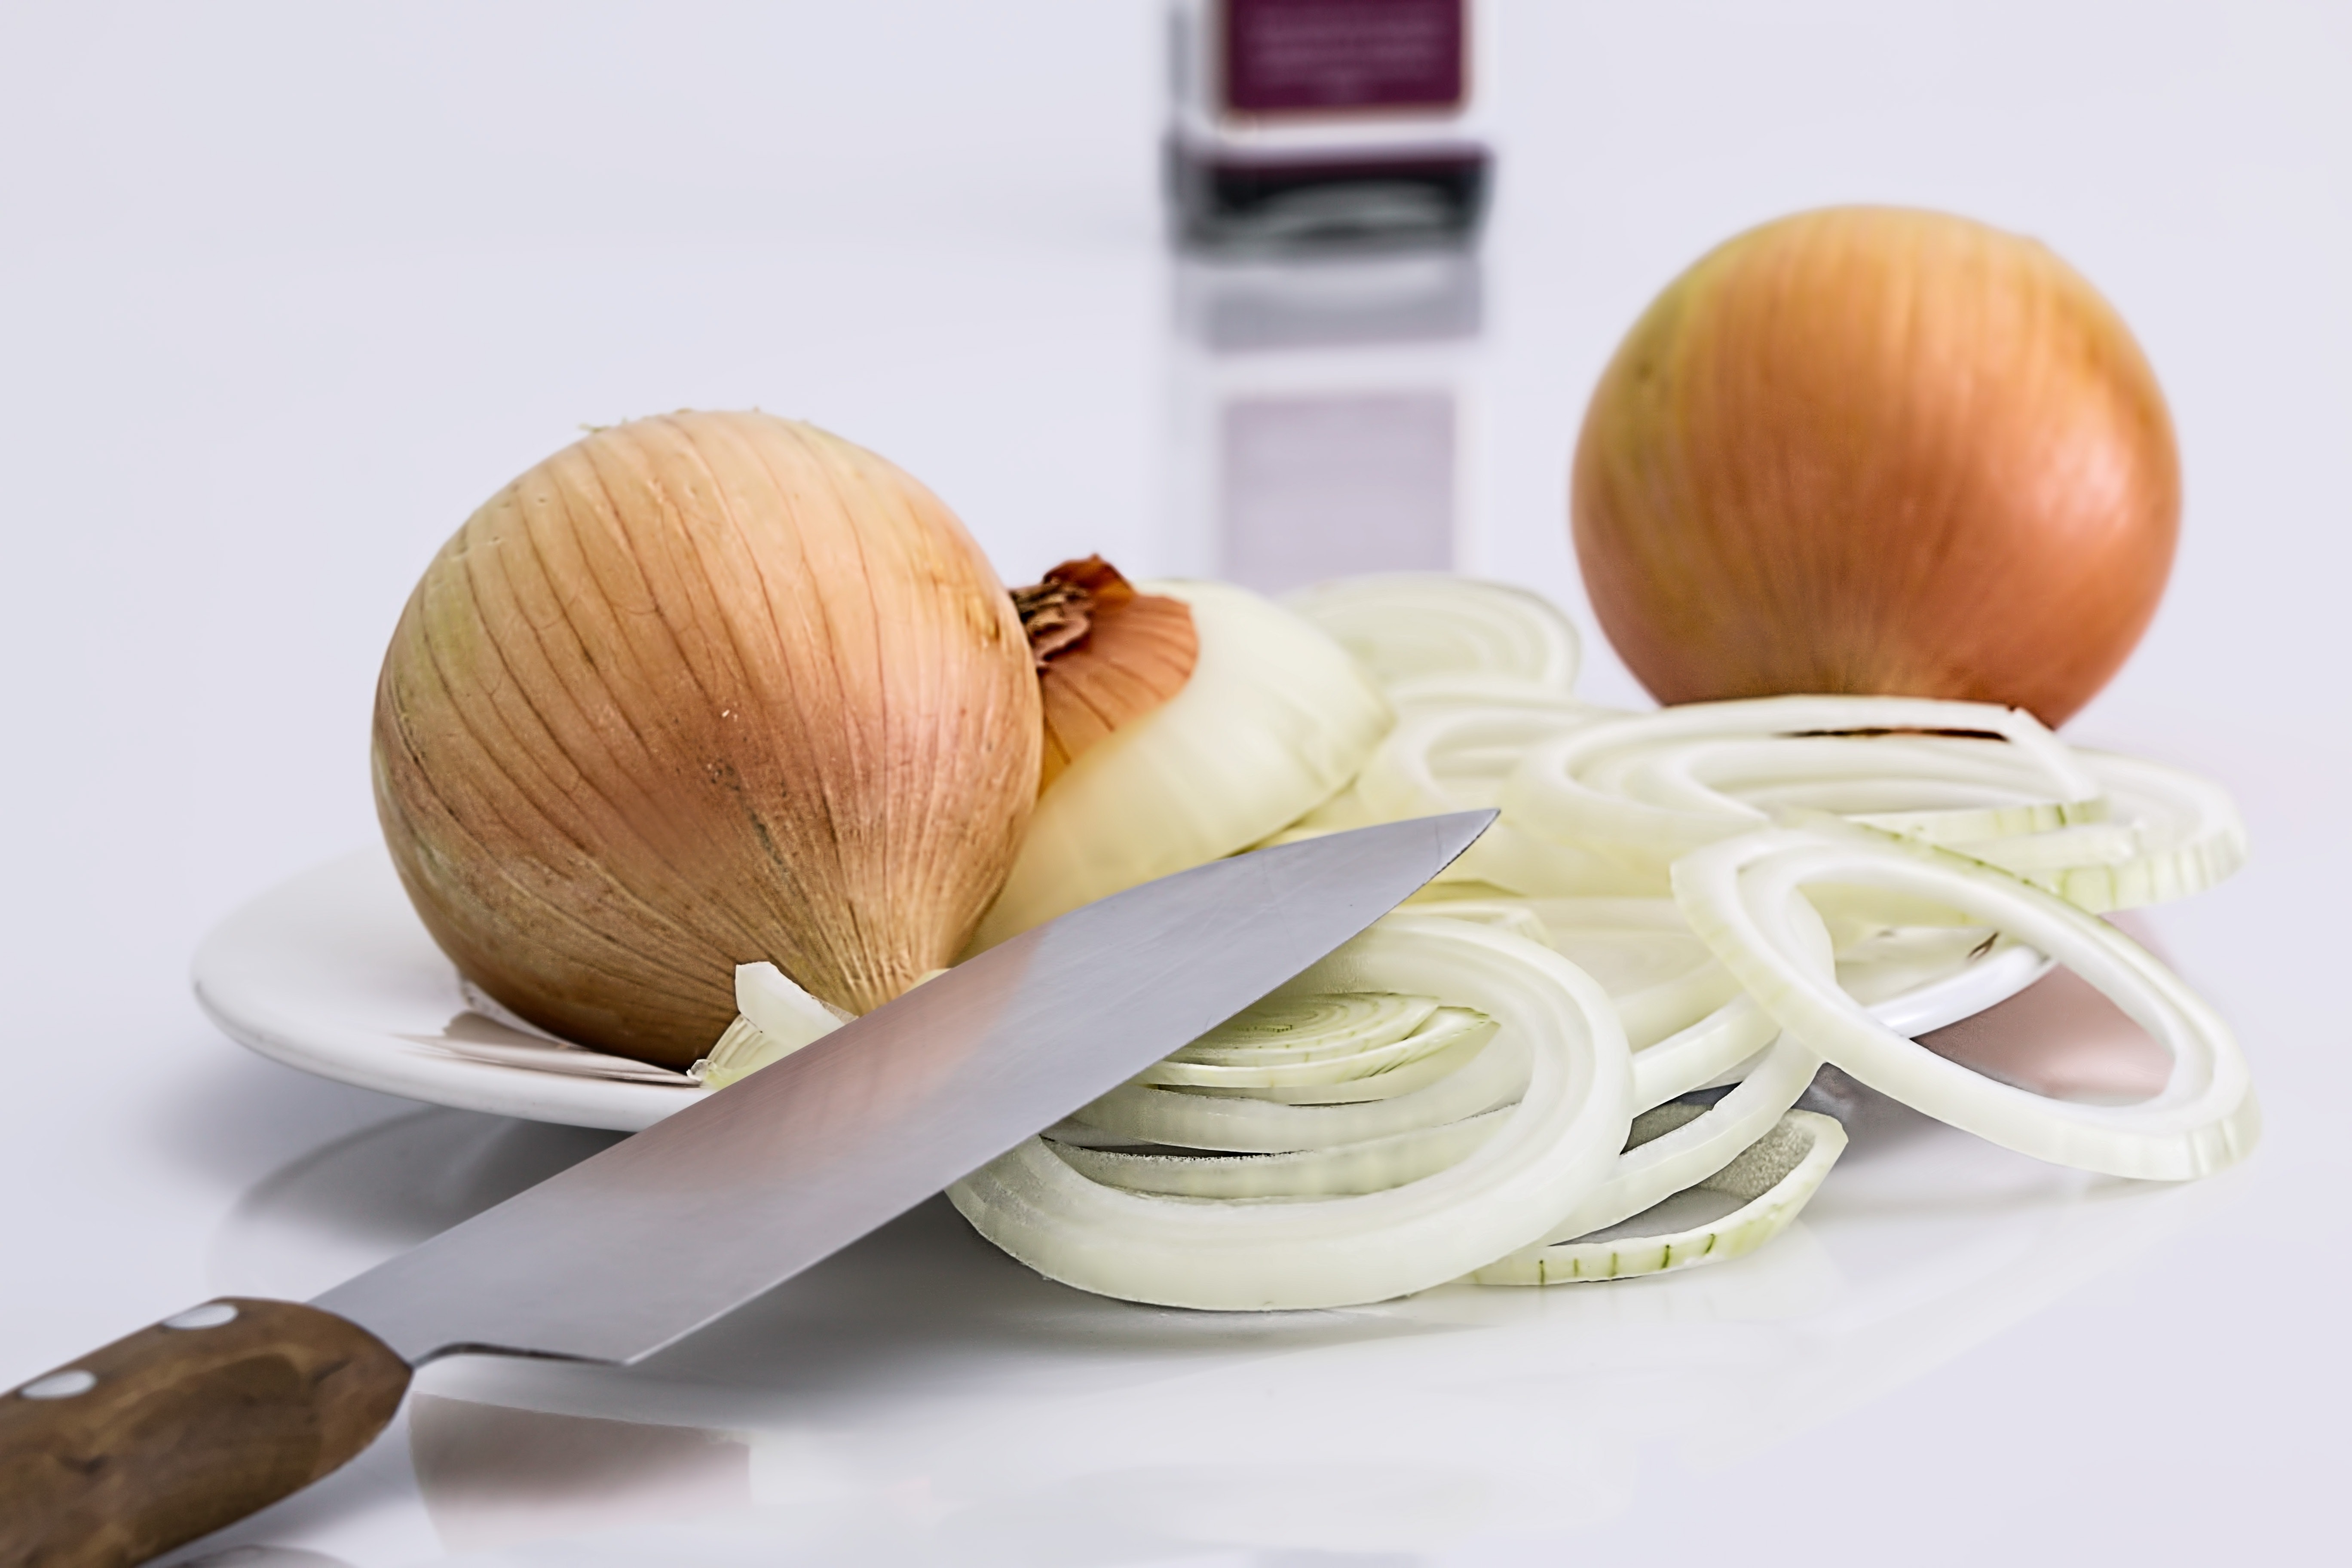 Onion Bulbs and Sliced Onion on Ceramic Plate, Cooking, Vegetable, Vegan, Slice, HQ Photo